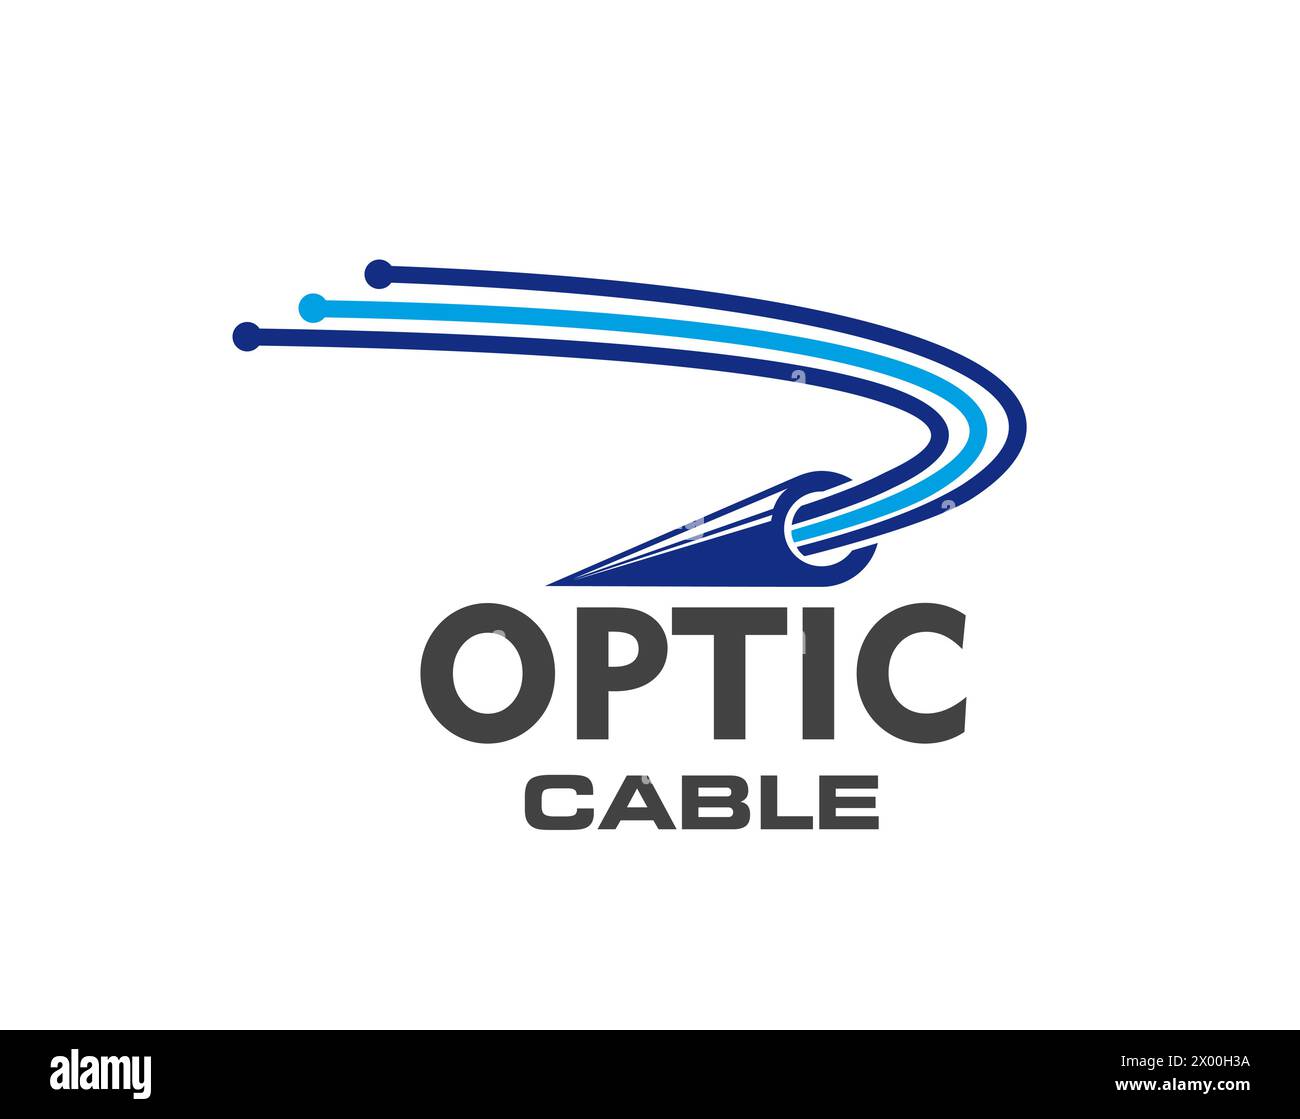 Fiber optic cable icon, telecommunication technology. Isolated vector emblem for Internet connection and networking. Dynamic wire strand lines convey speed, connectivity and broadband data traffic Stock Vector